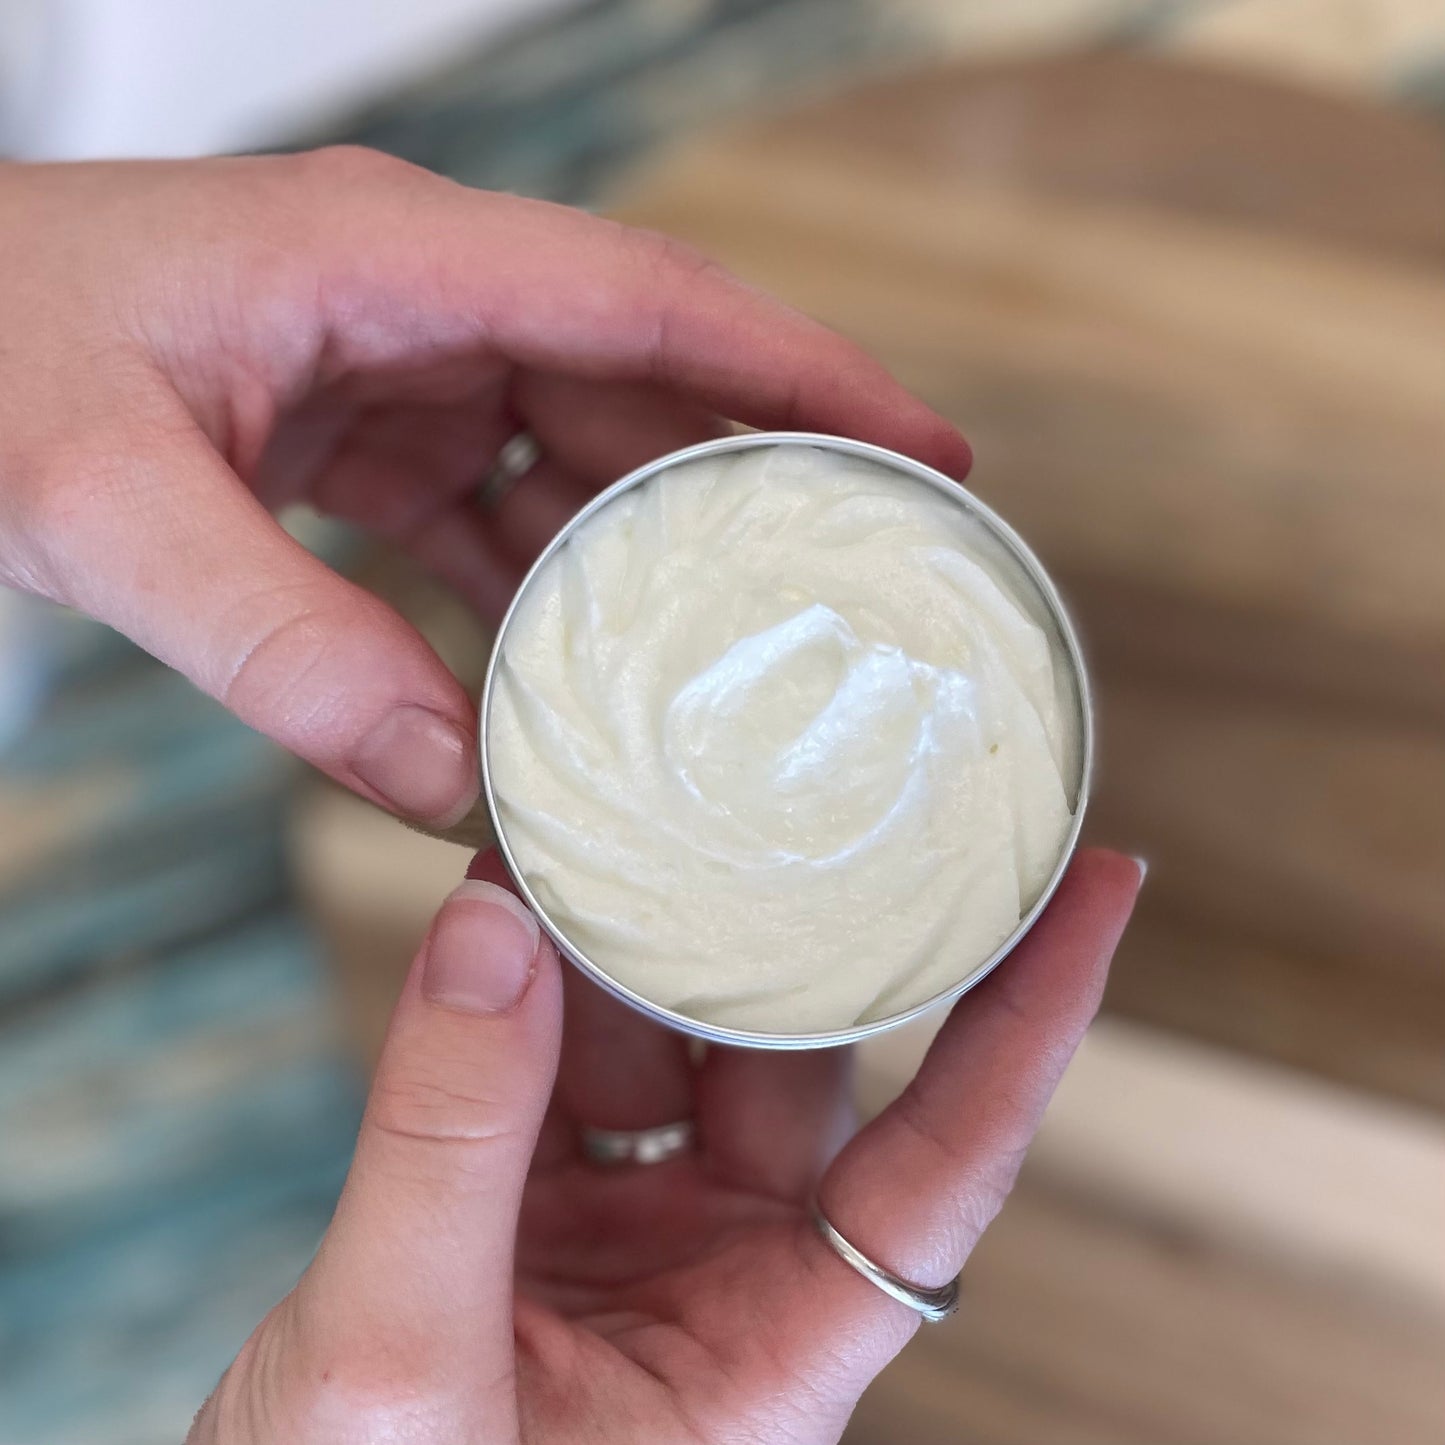 Whipped Tallow Skin Cream | All Natural Moisturizer and Body Butter | Essential Oil Scent | Made with Local Ingredients | Aluminum Container